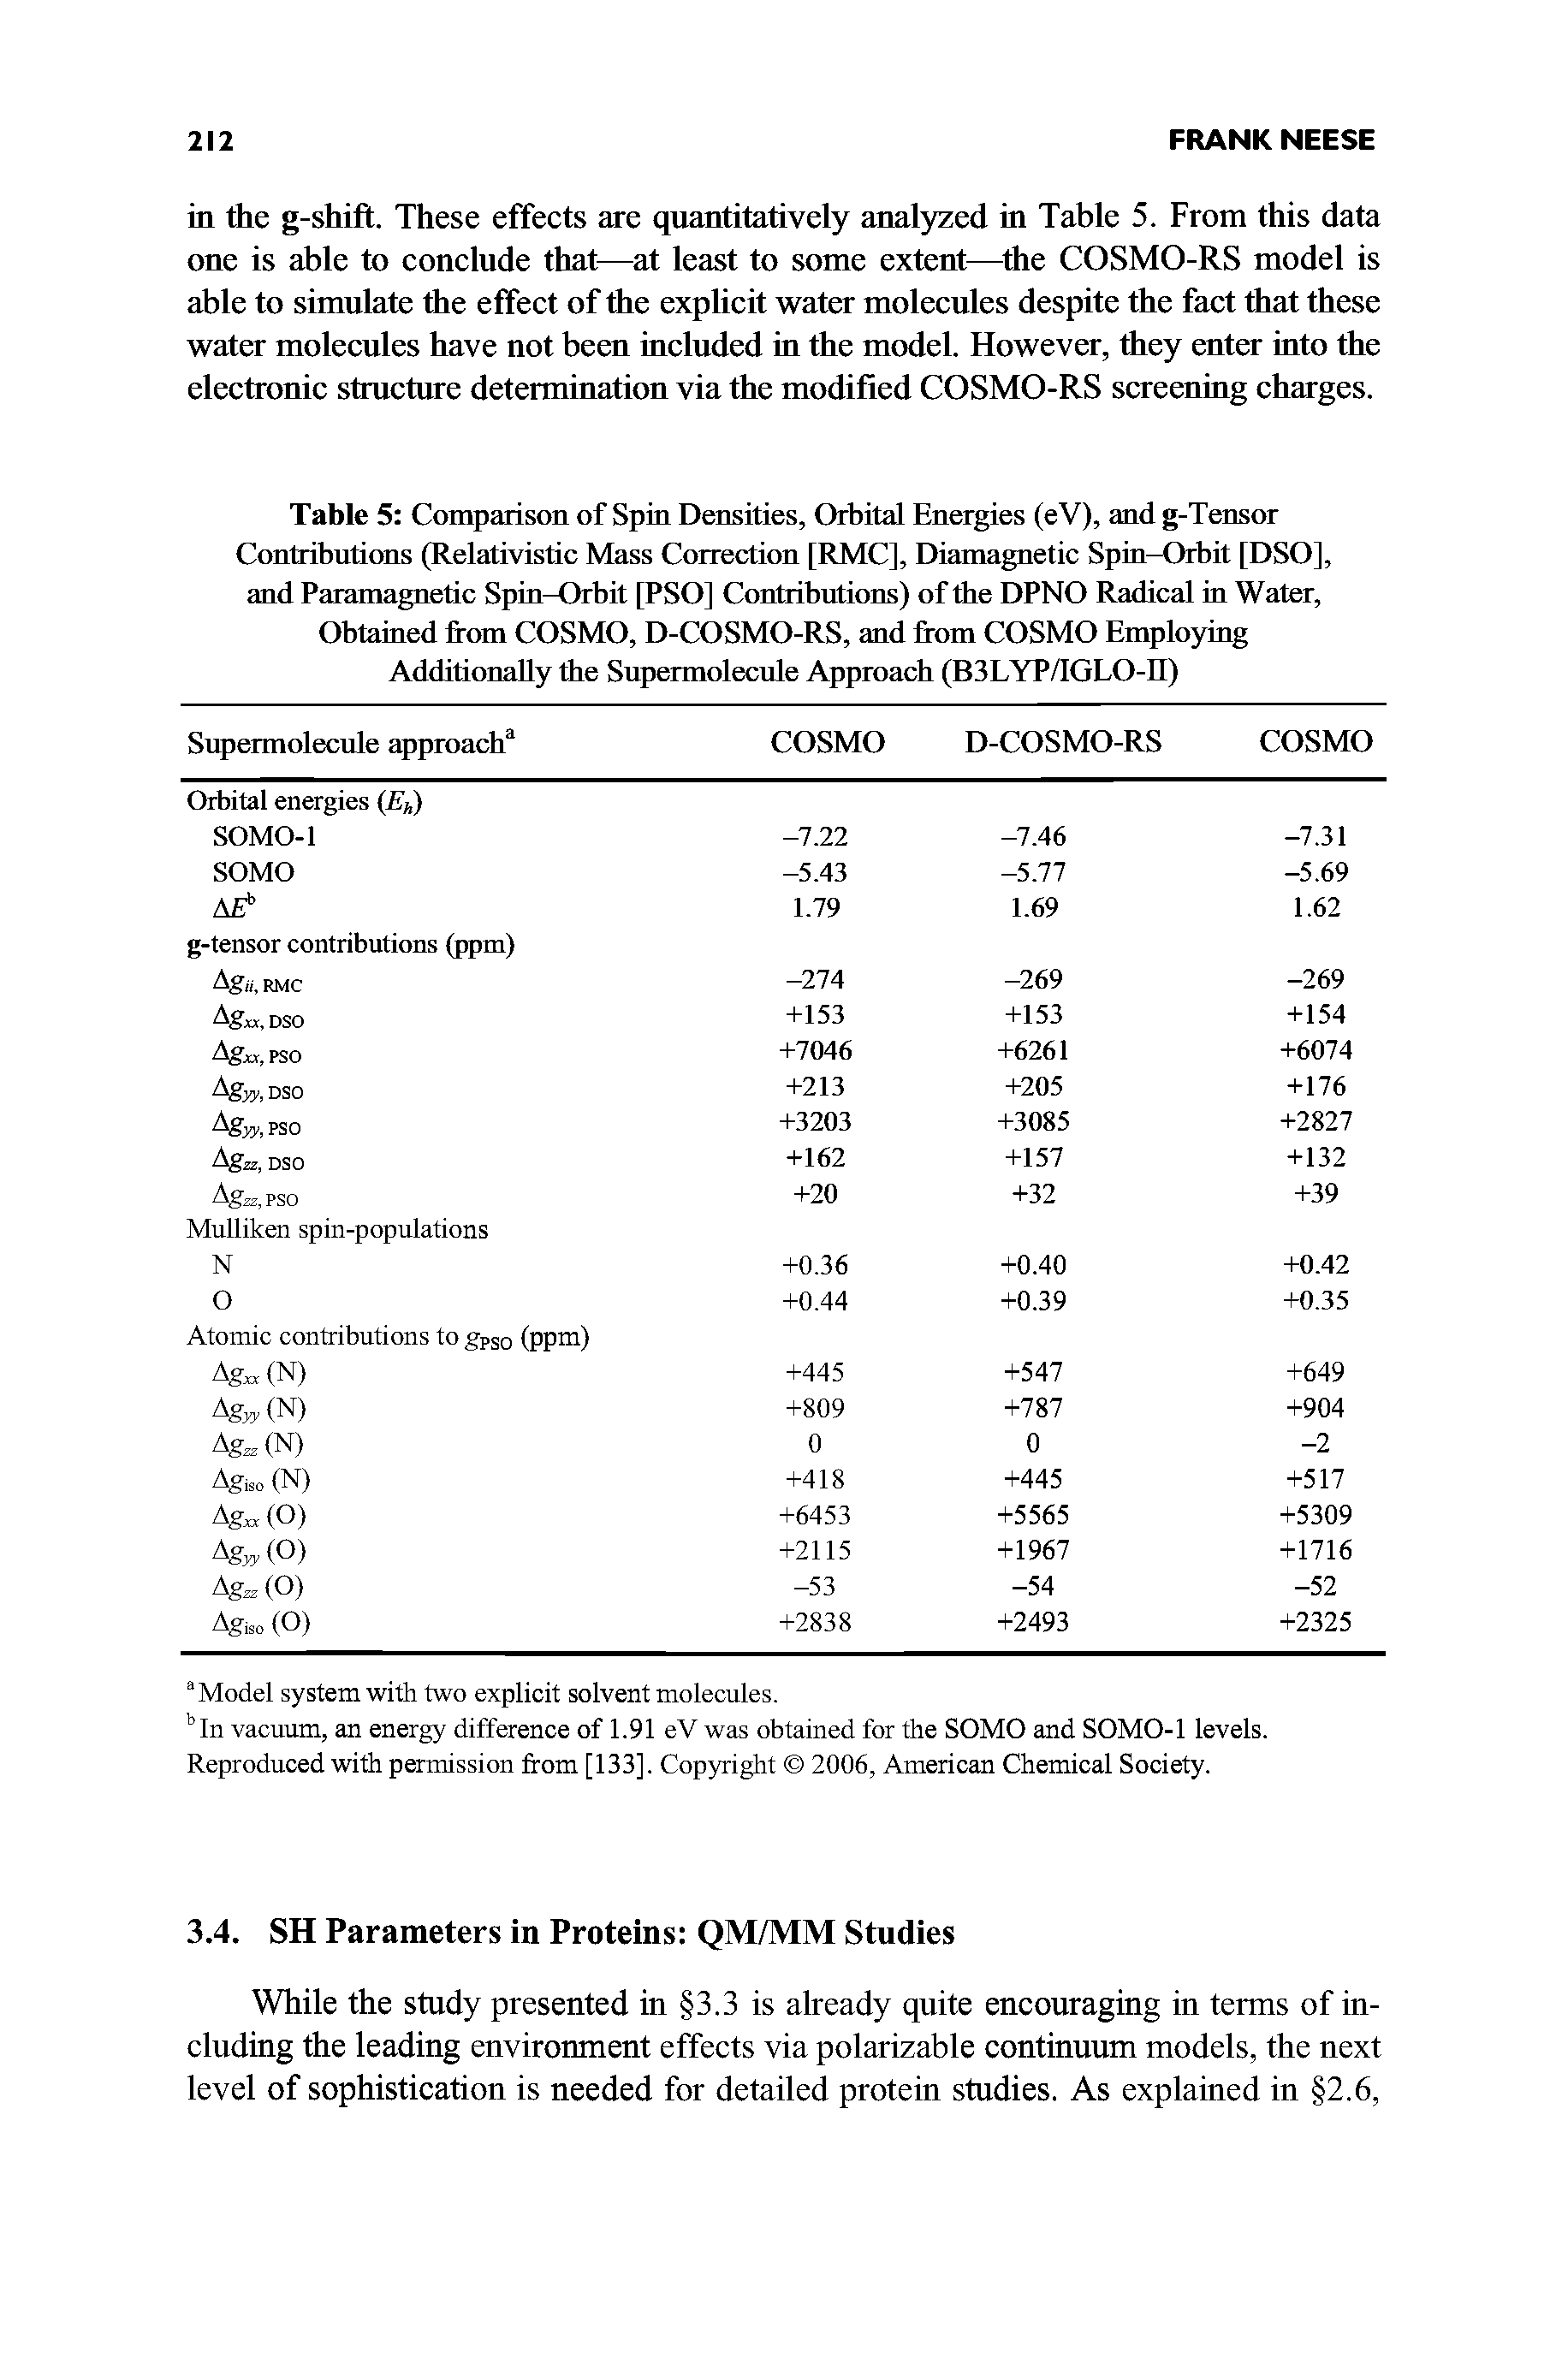 Table 5 Comparison of Spin Densities, Orbital Energies (eV), and g-Tensor Contributions (Relativistic Mass Correction [RMC], Diamagnetic Spin-Orbit [DSO], and Paramagnetic Spin-Orbit [PSO] Contributions) of the DPNO Radical in Water, Obtained from COSMO, D-COSMO-RS, and from COSMO Emplo3dng Additionally the Supermolecule Approach (B3LYP/IGLO-11)...